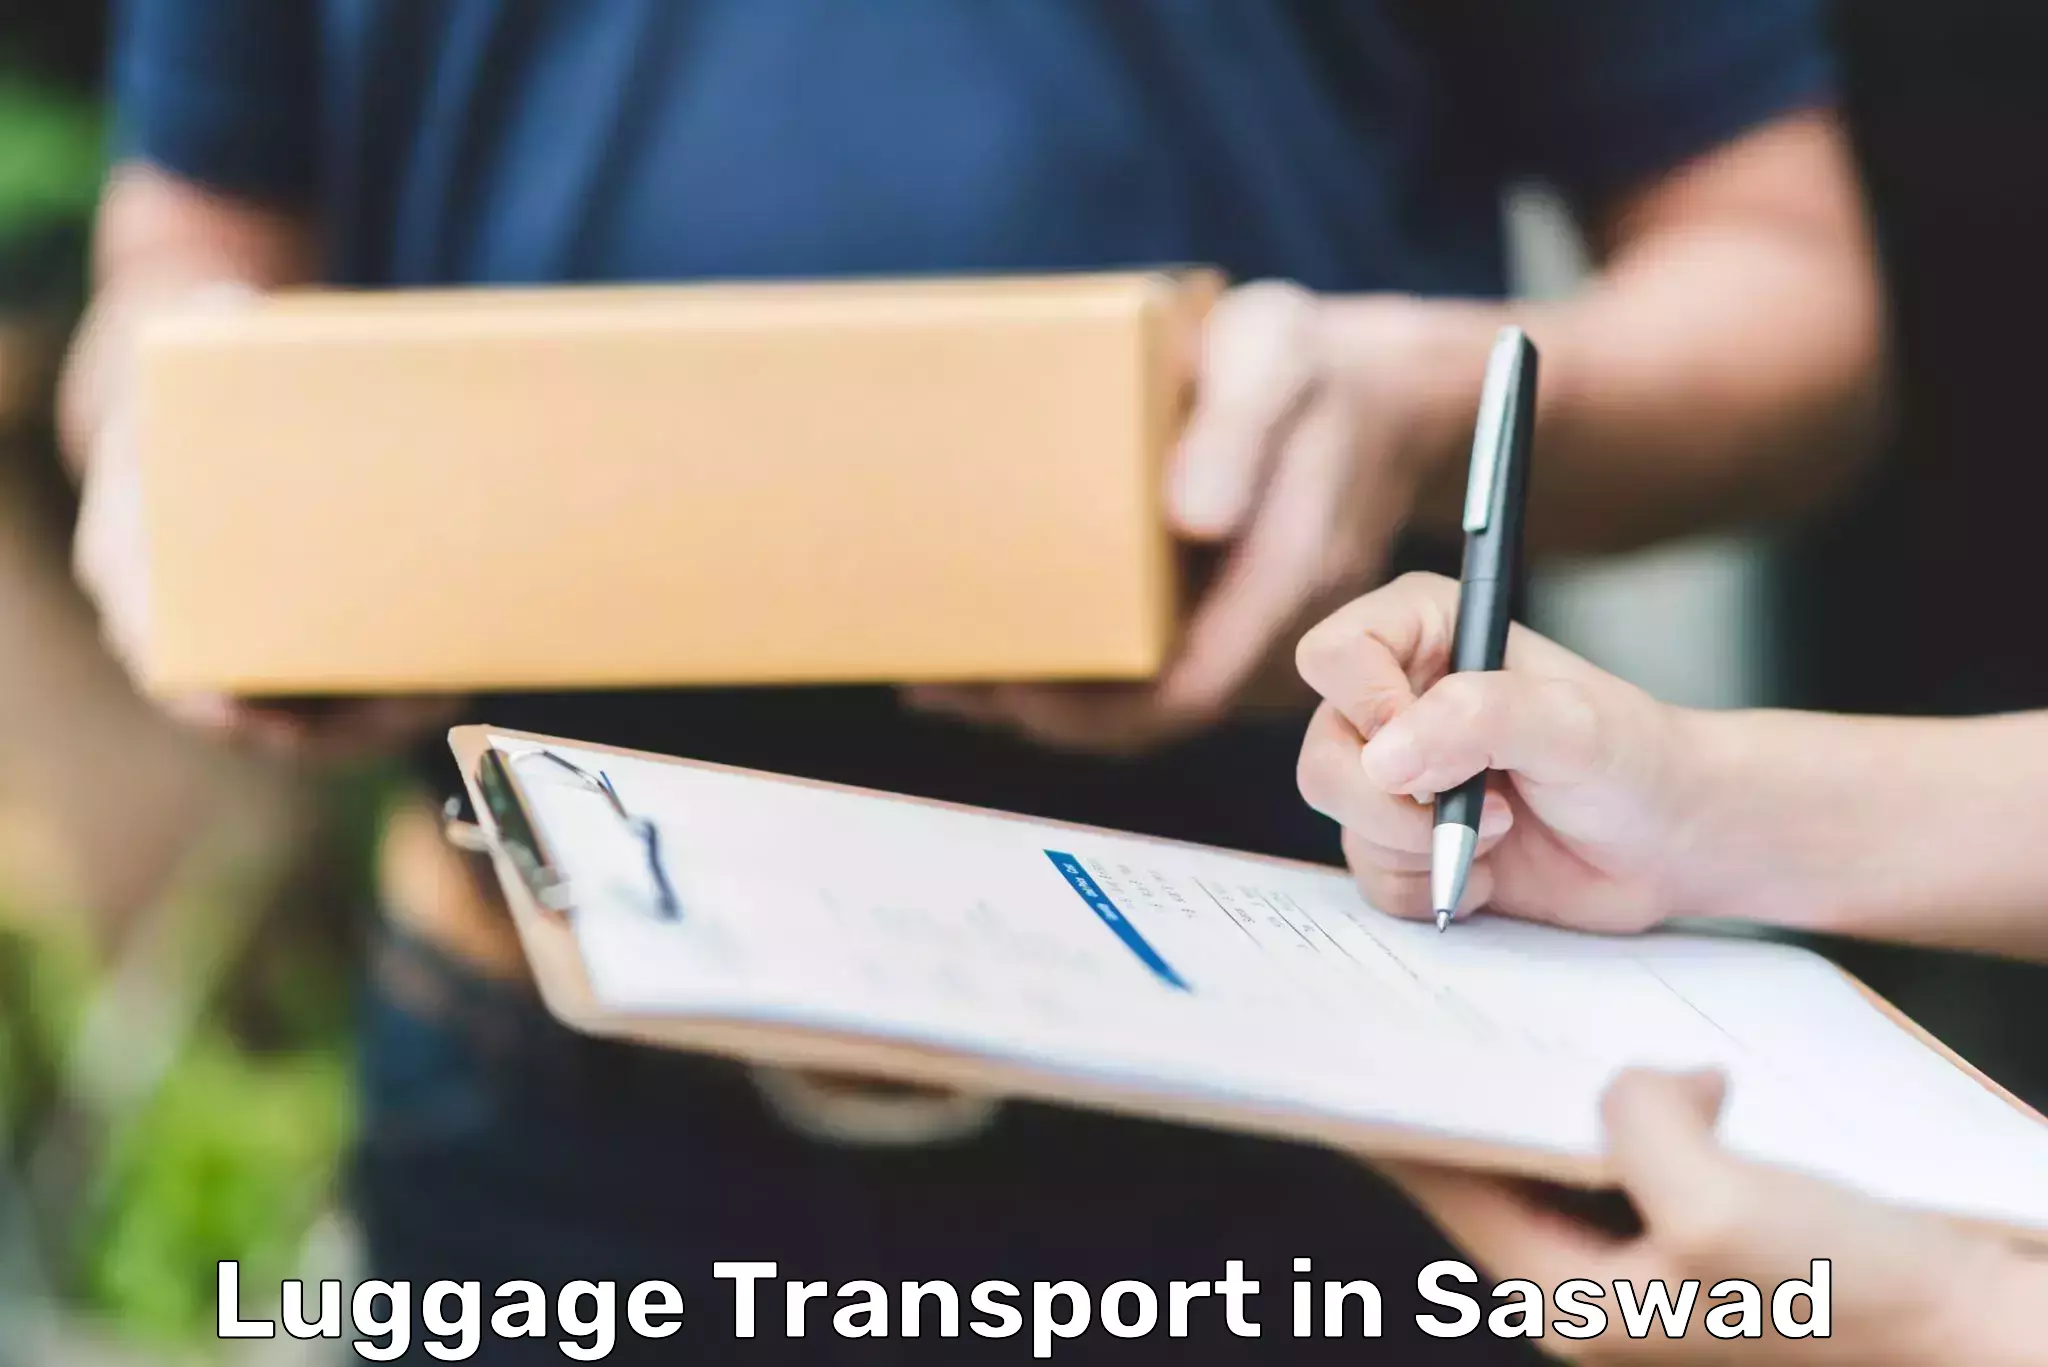 Luggage shipping trends in Saswad